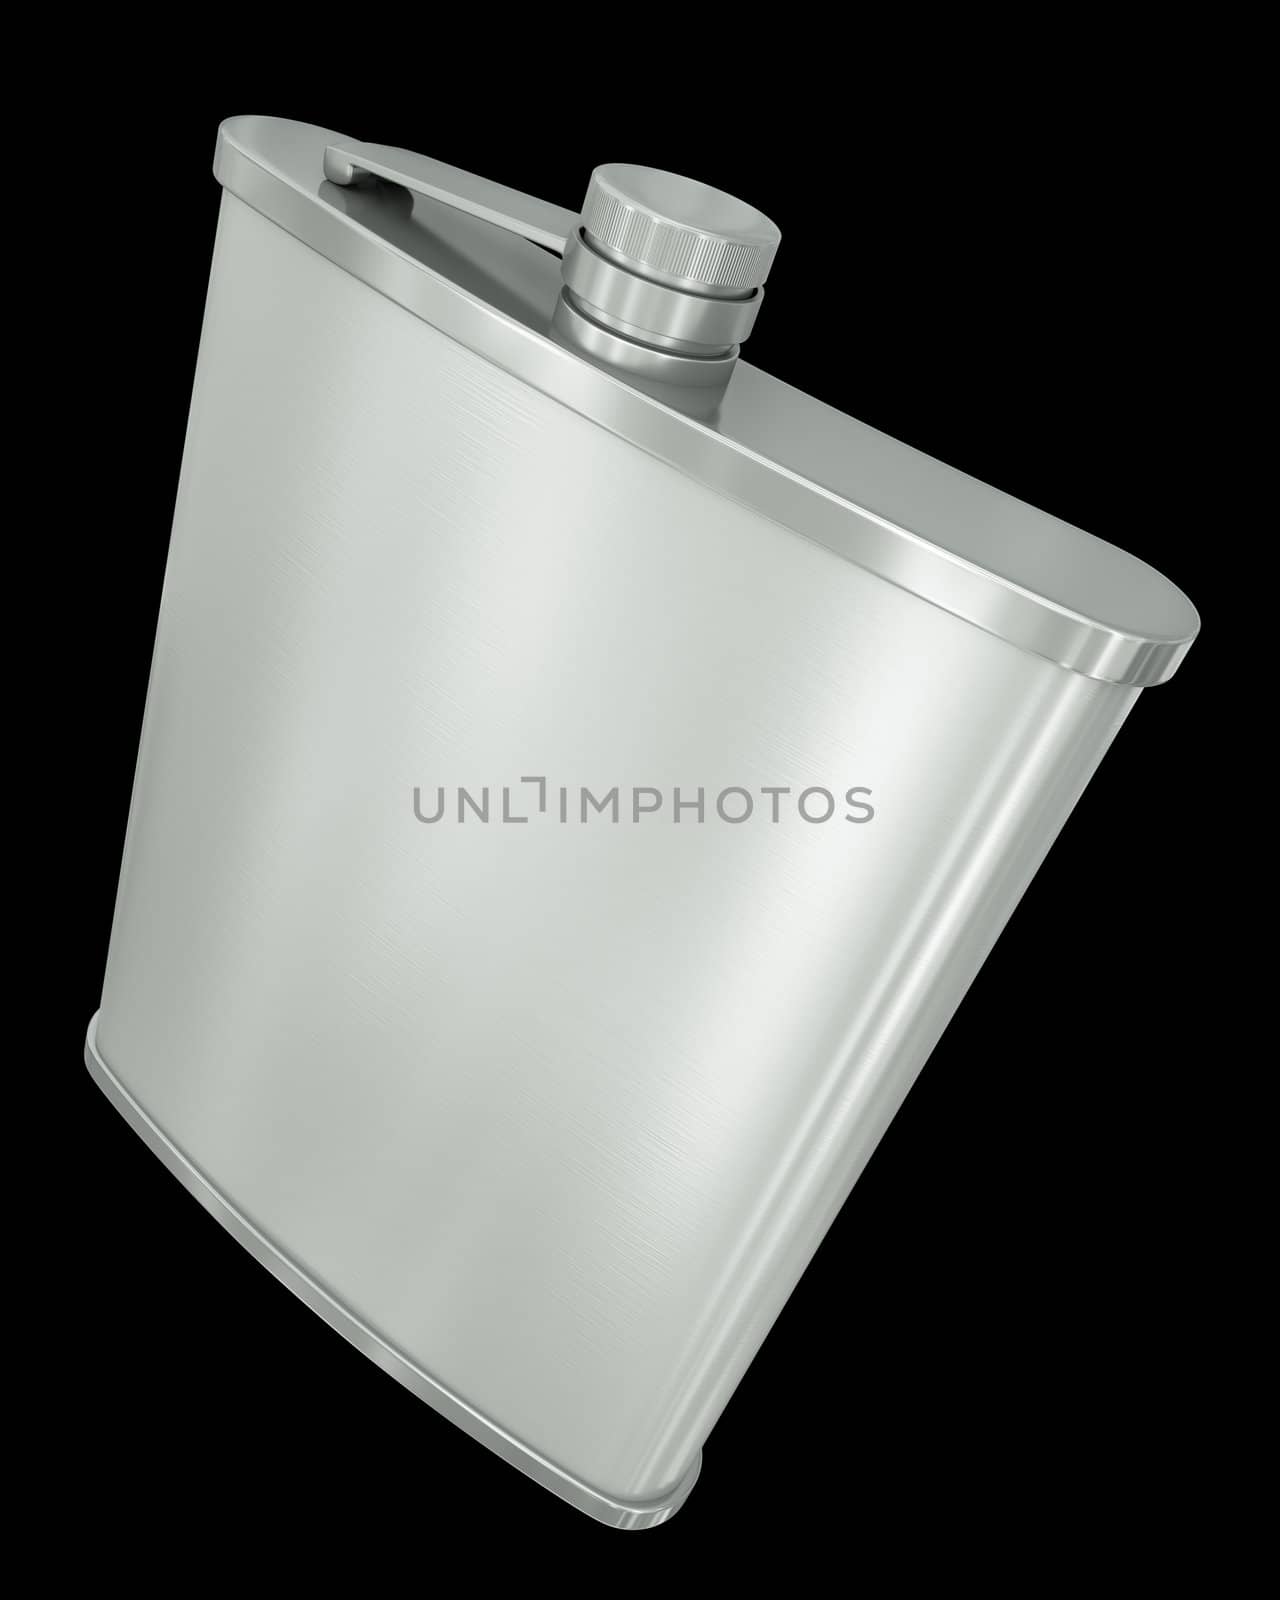 Hip flask isolated on black background. 3D render.